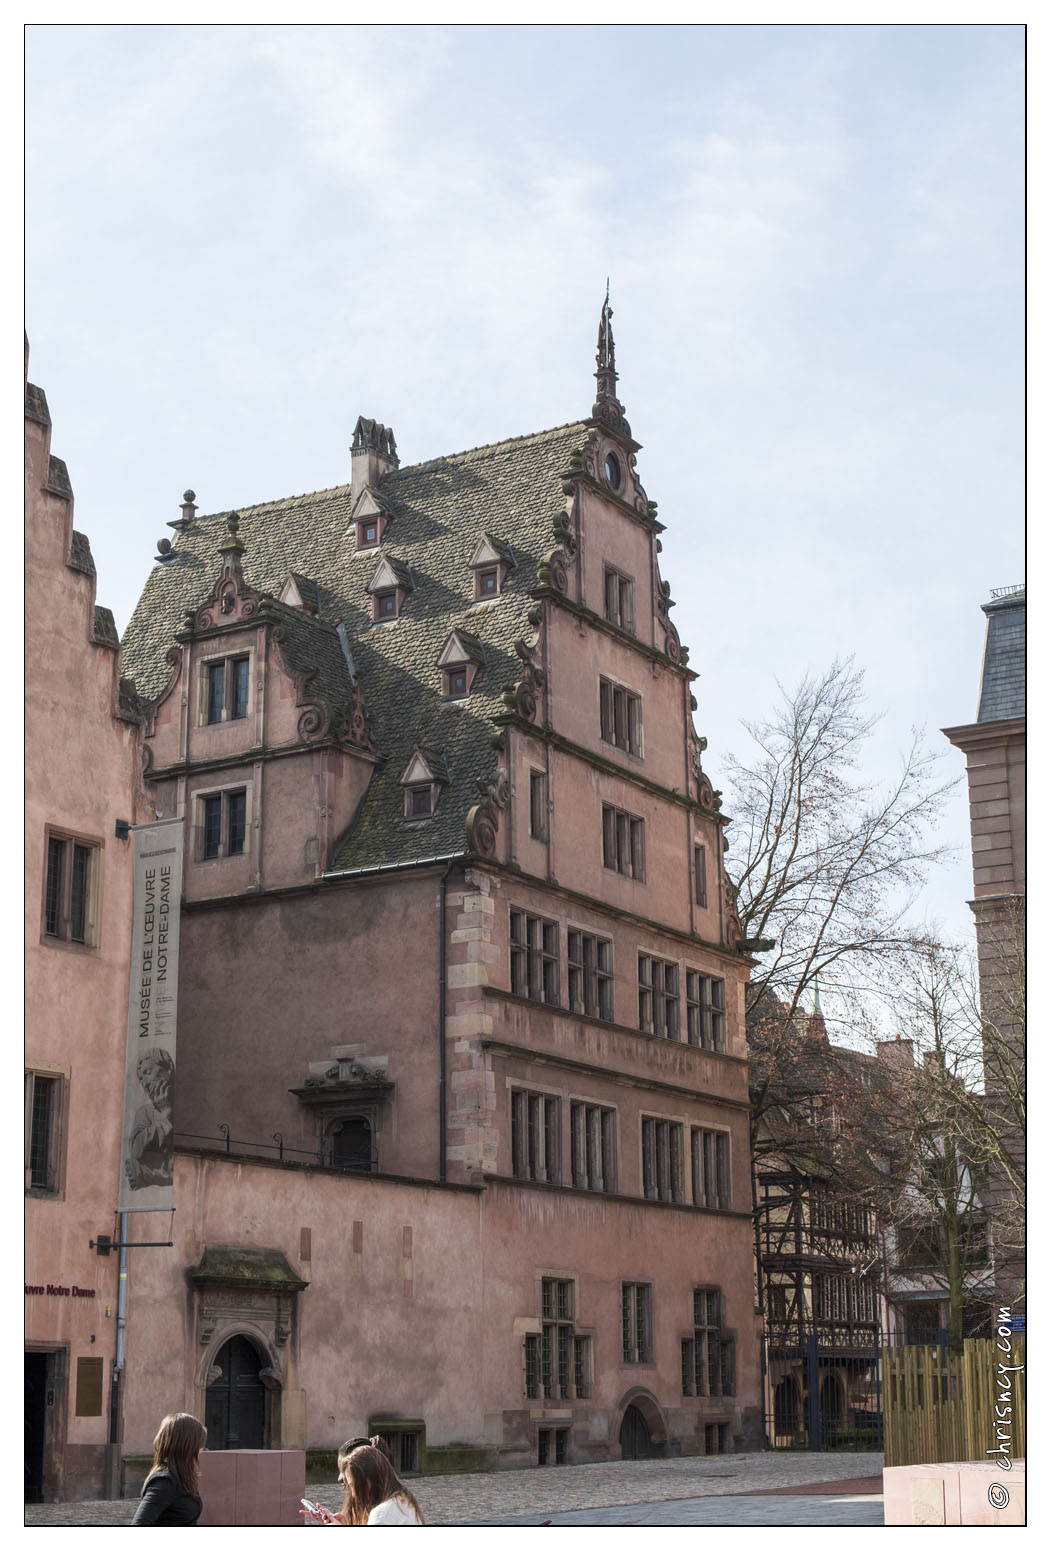 20140311-32_8168-Strasbourg_Musee_Place_du_Chateau.jpg